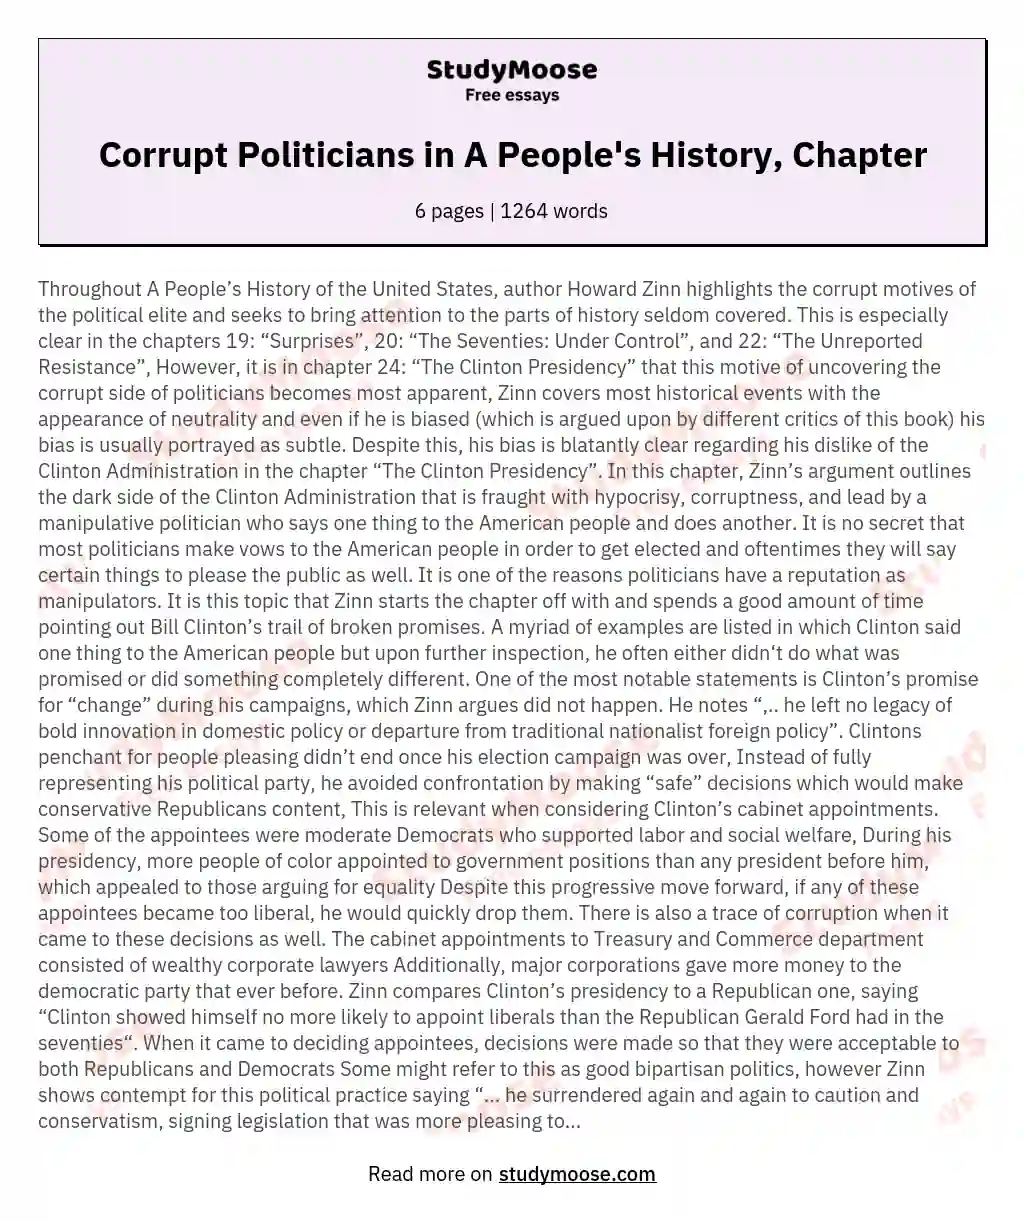 Corrupt Politicians in A People's History, Chapter essay